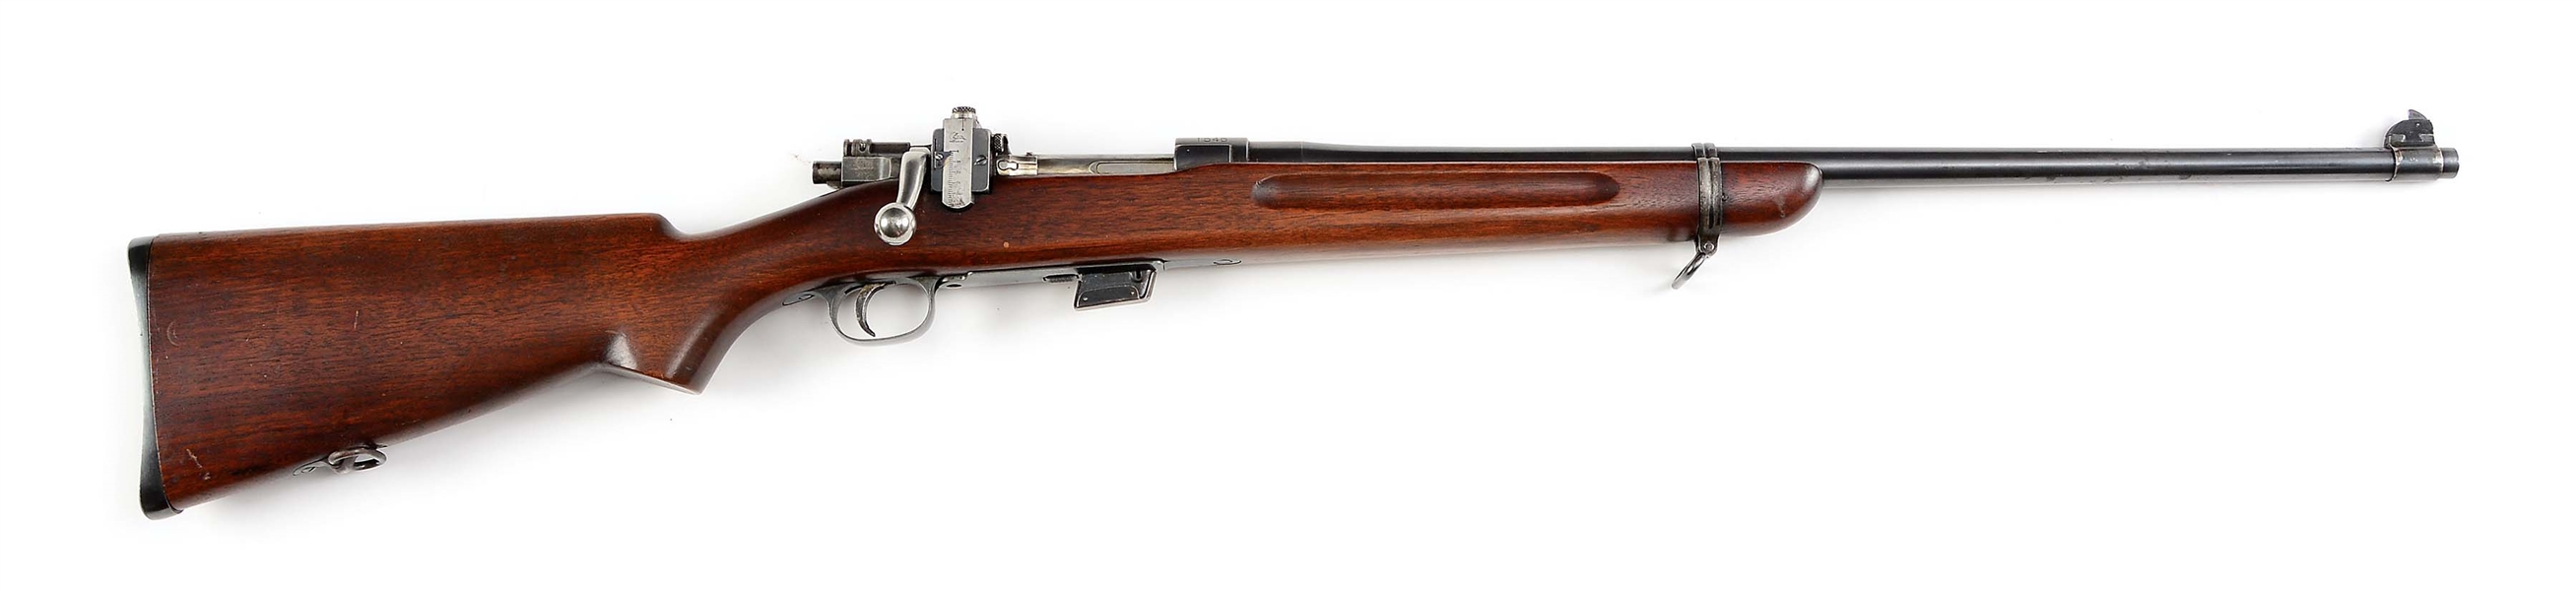 (C) OUTSTANDING EARLY SPRINGFIELD MODEL 1922 RIFLE DATED 08-1922.